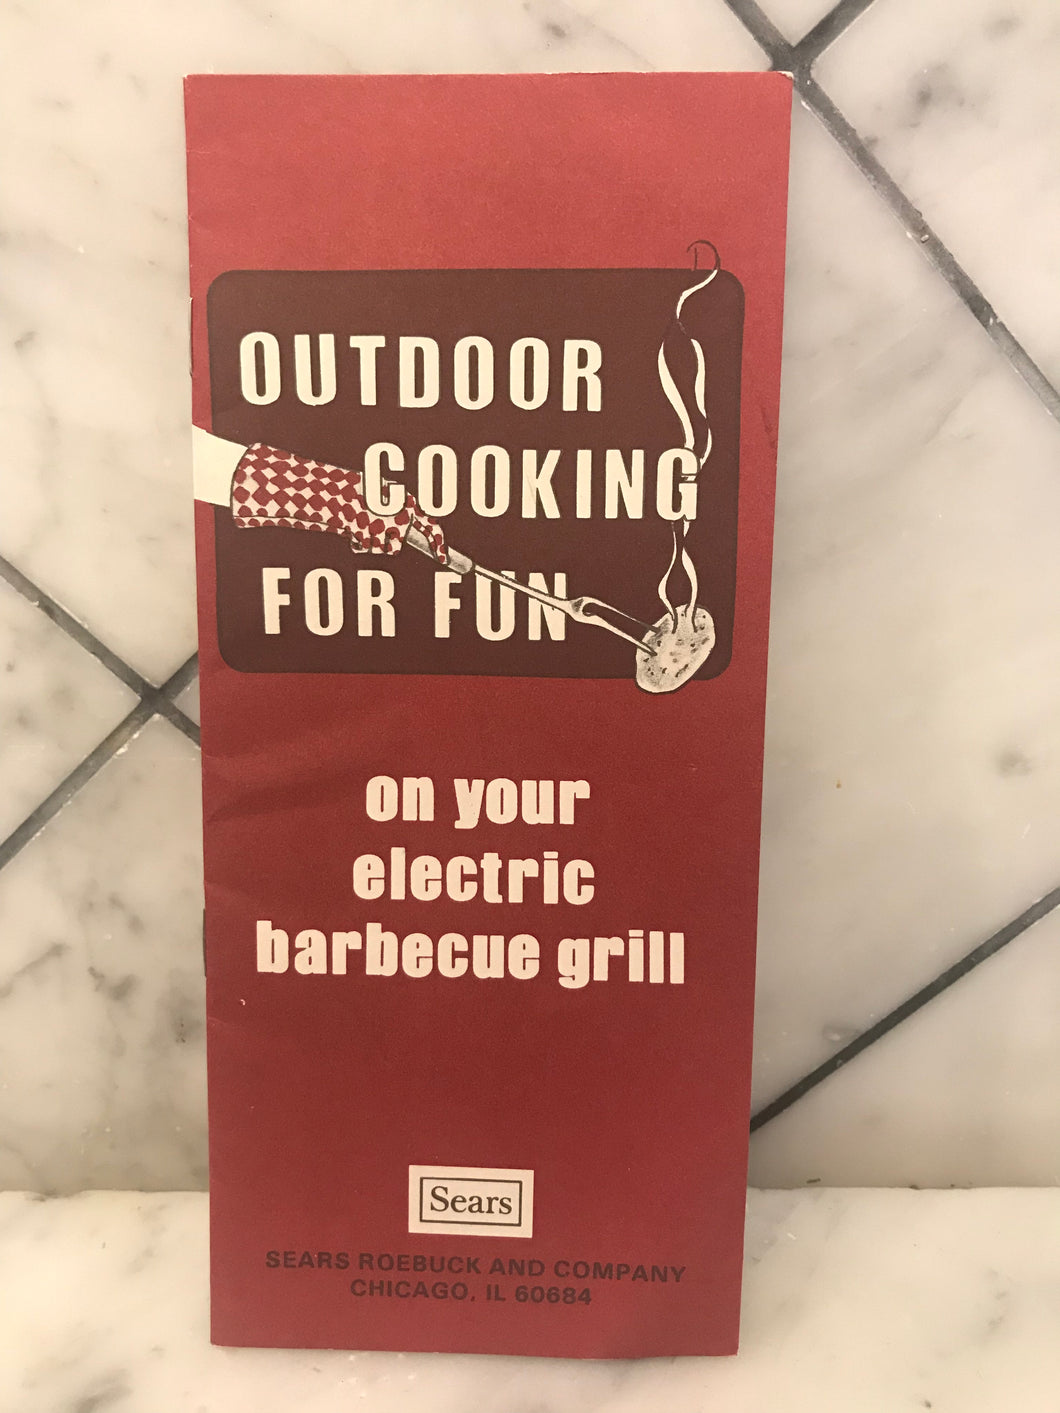 Outdoor Cooking for Fun On Your Electric Barbecue Grill